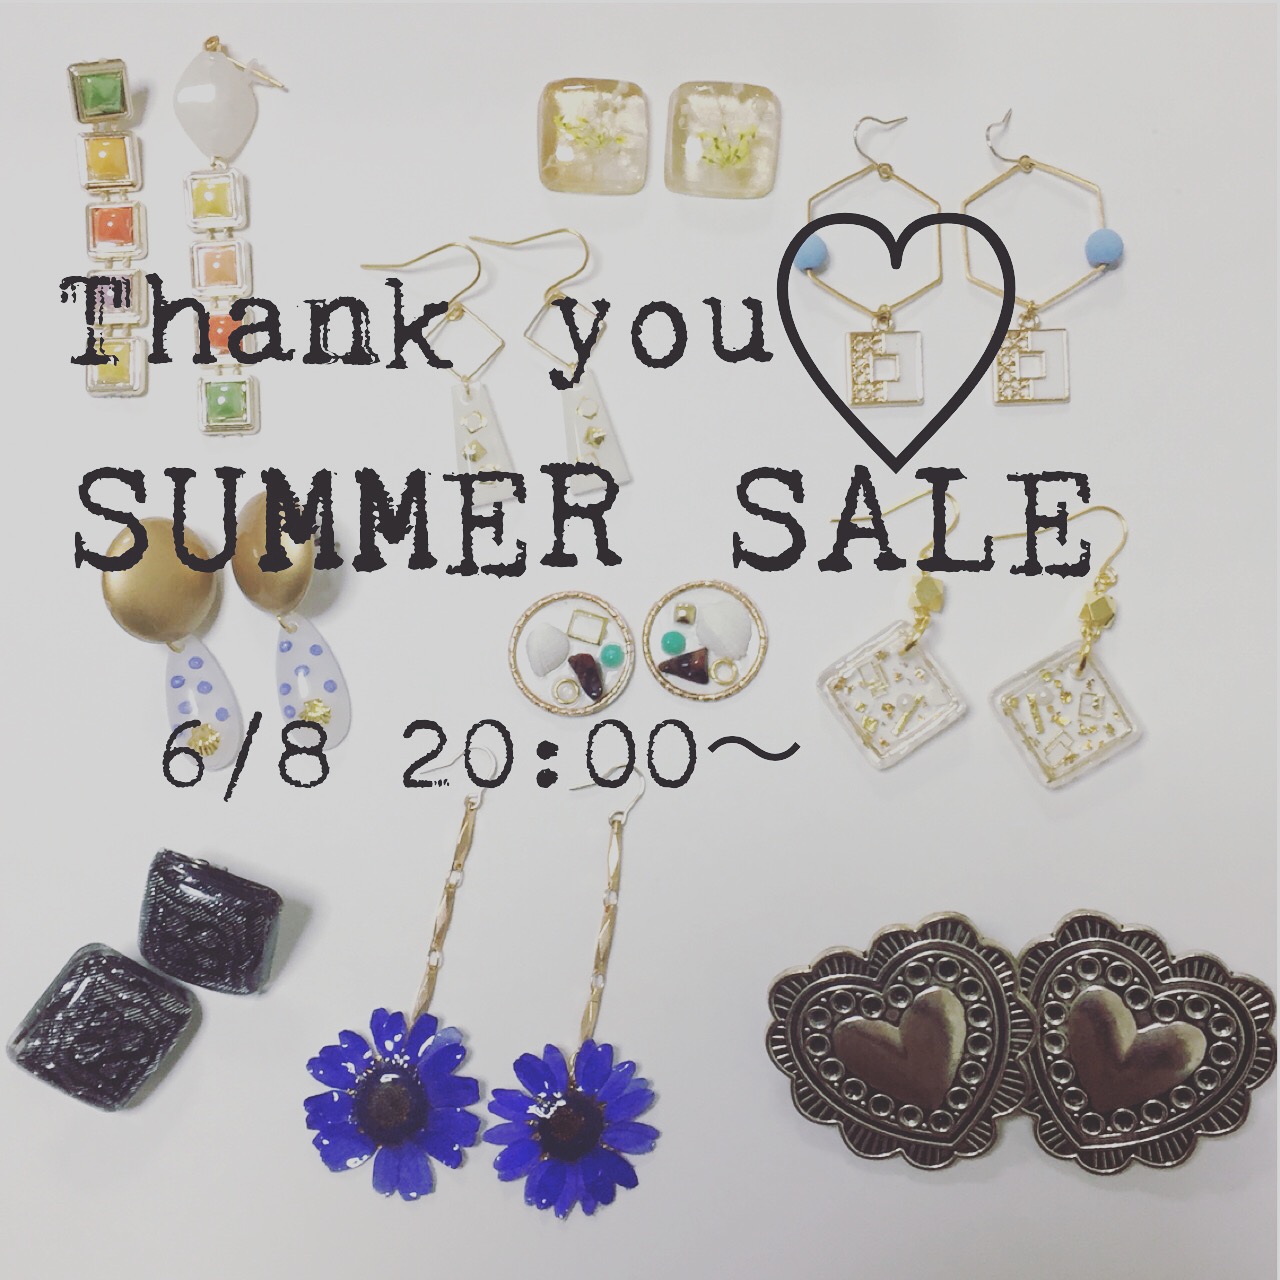 Thank you SUMMER SALE！